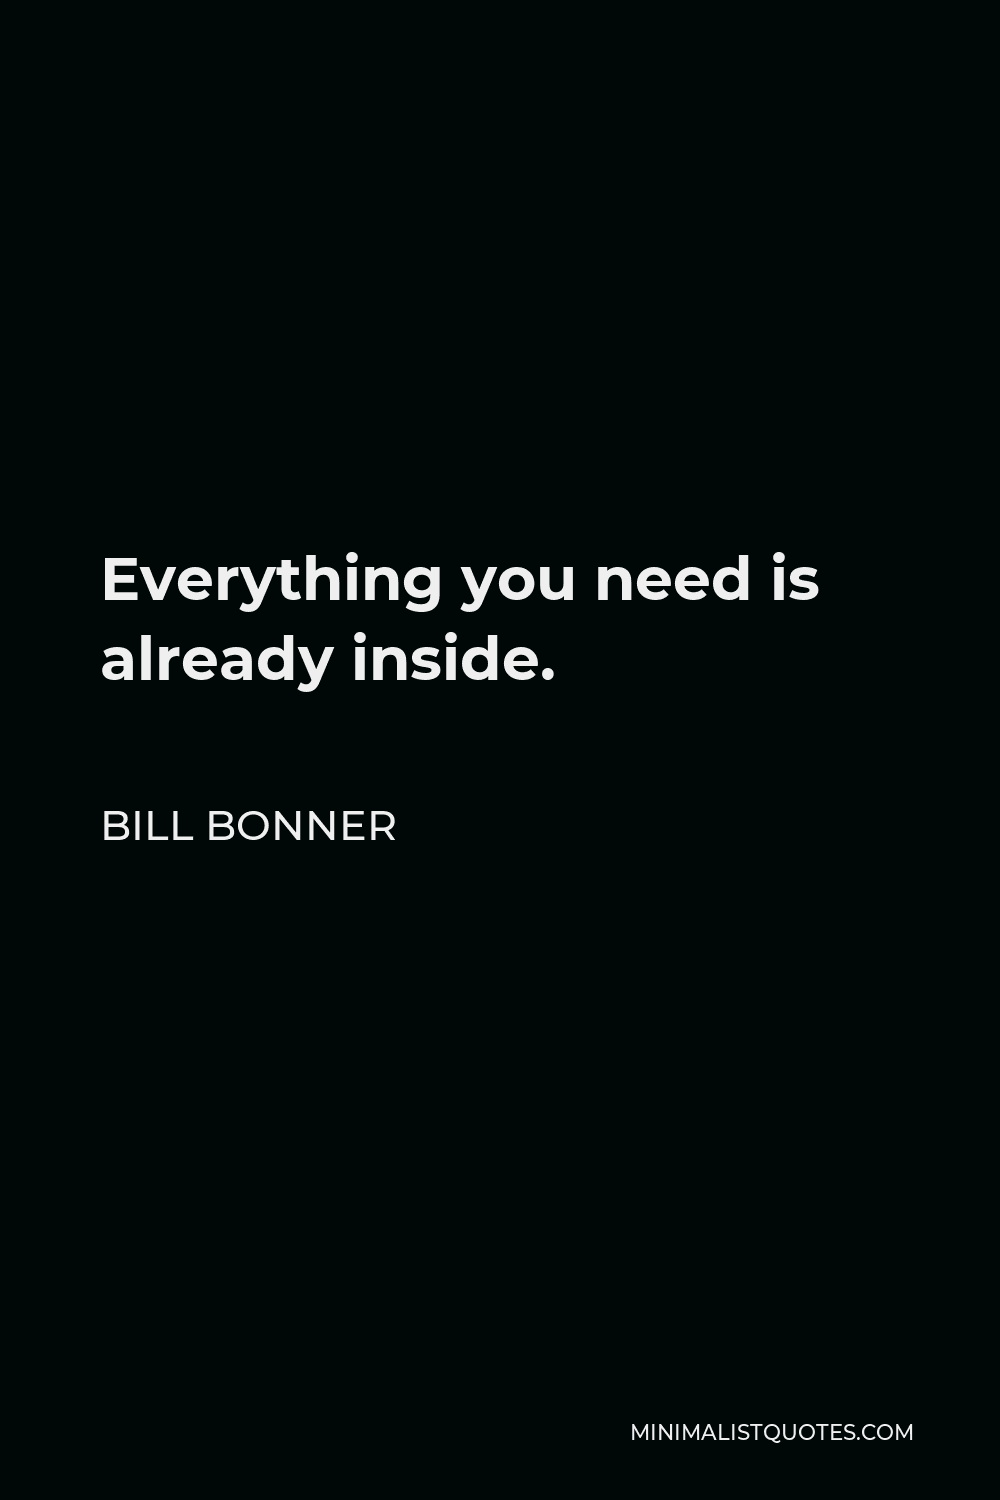 Bill Bonner Quote - Everything you need is already inside.